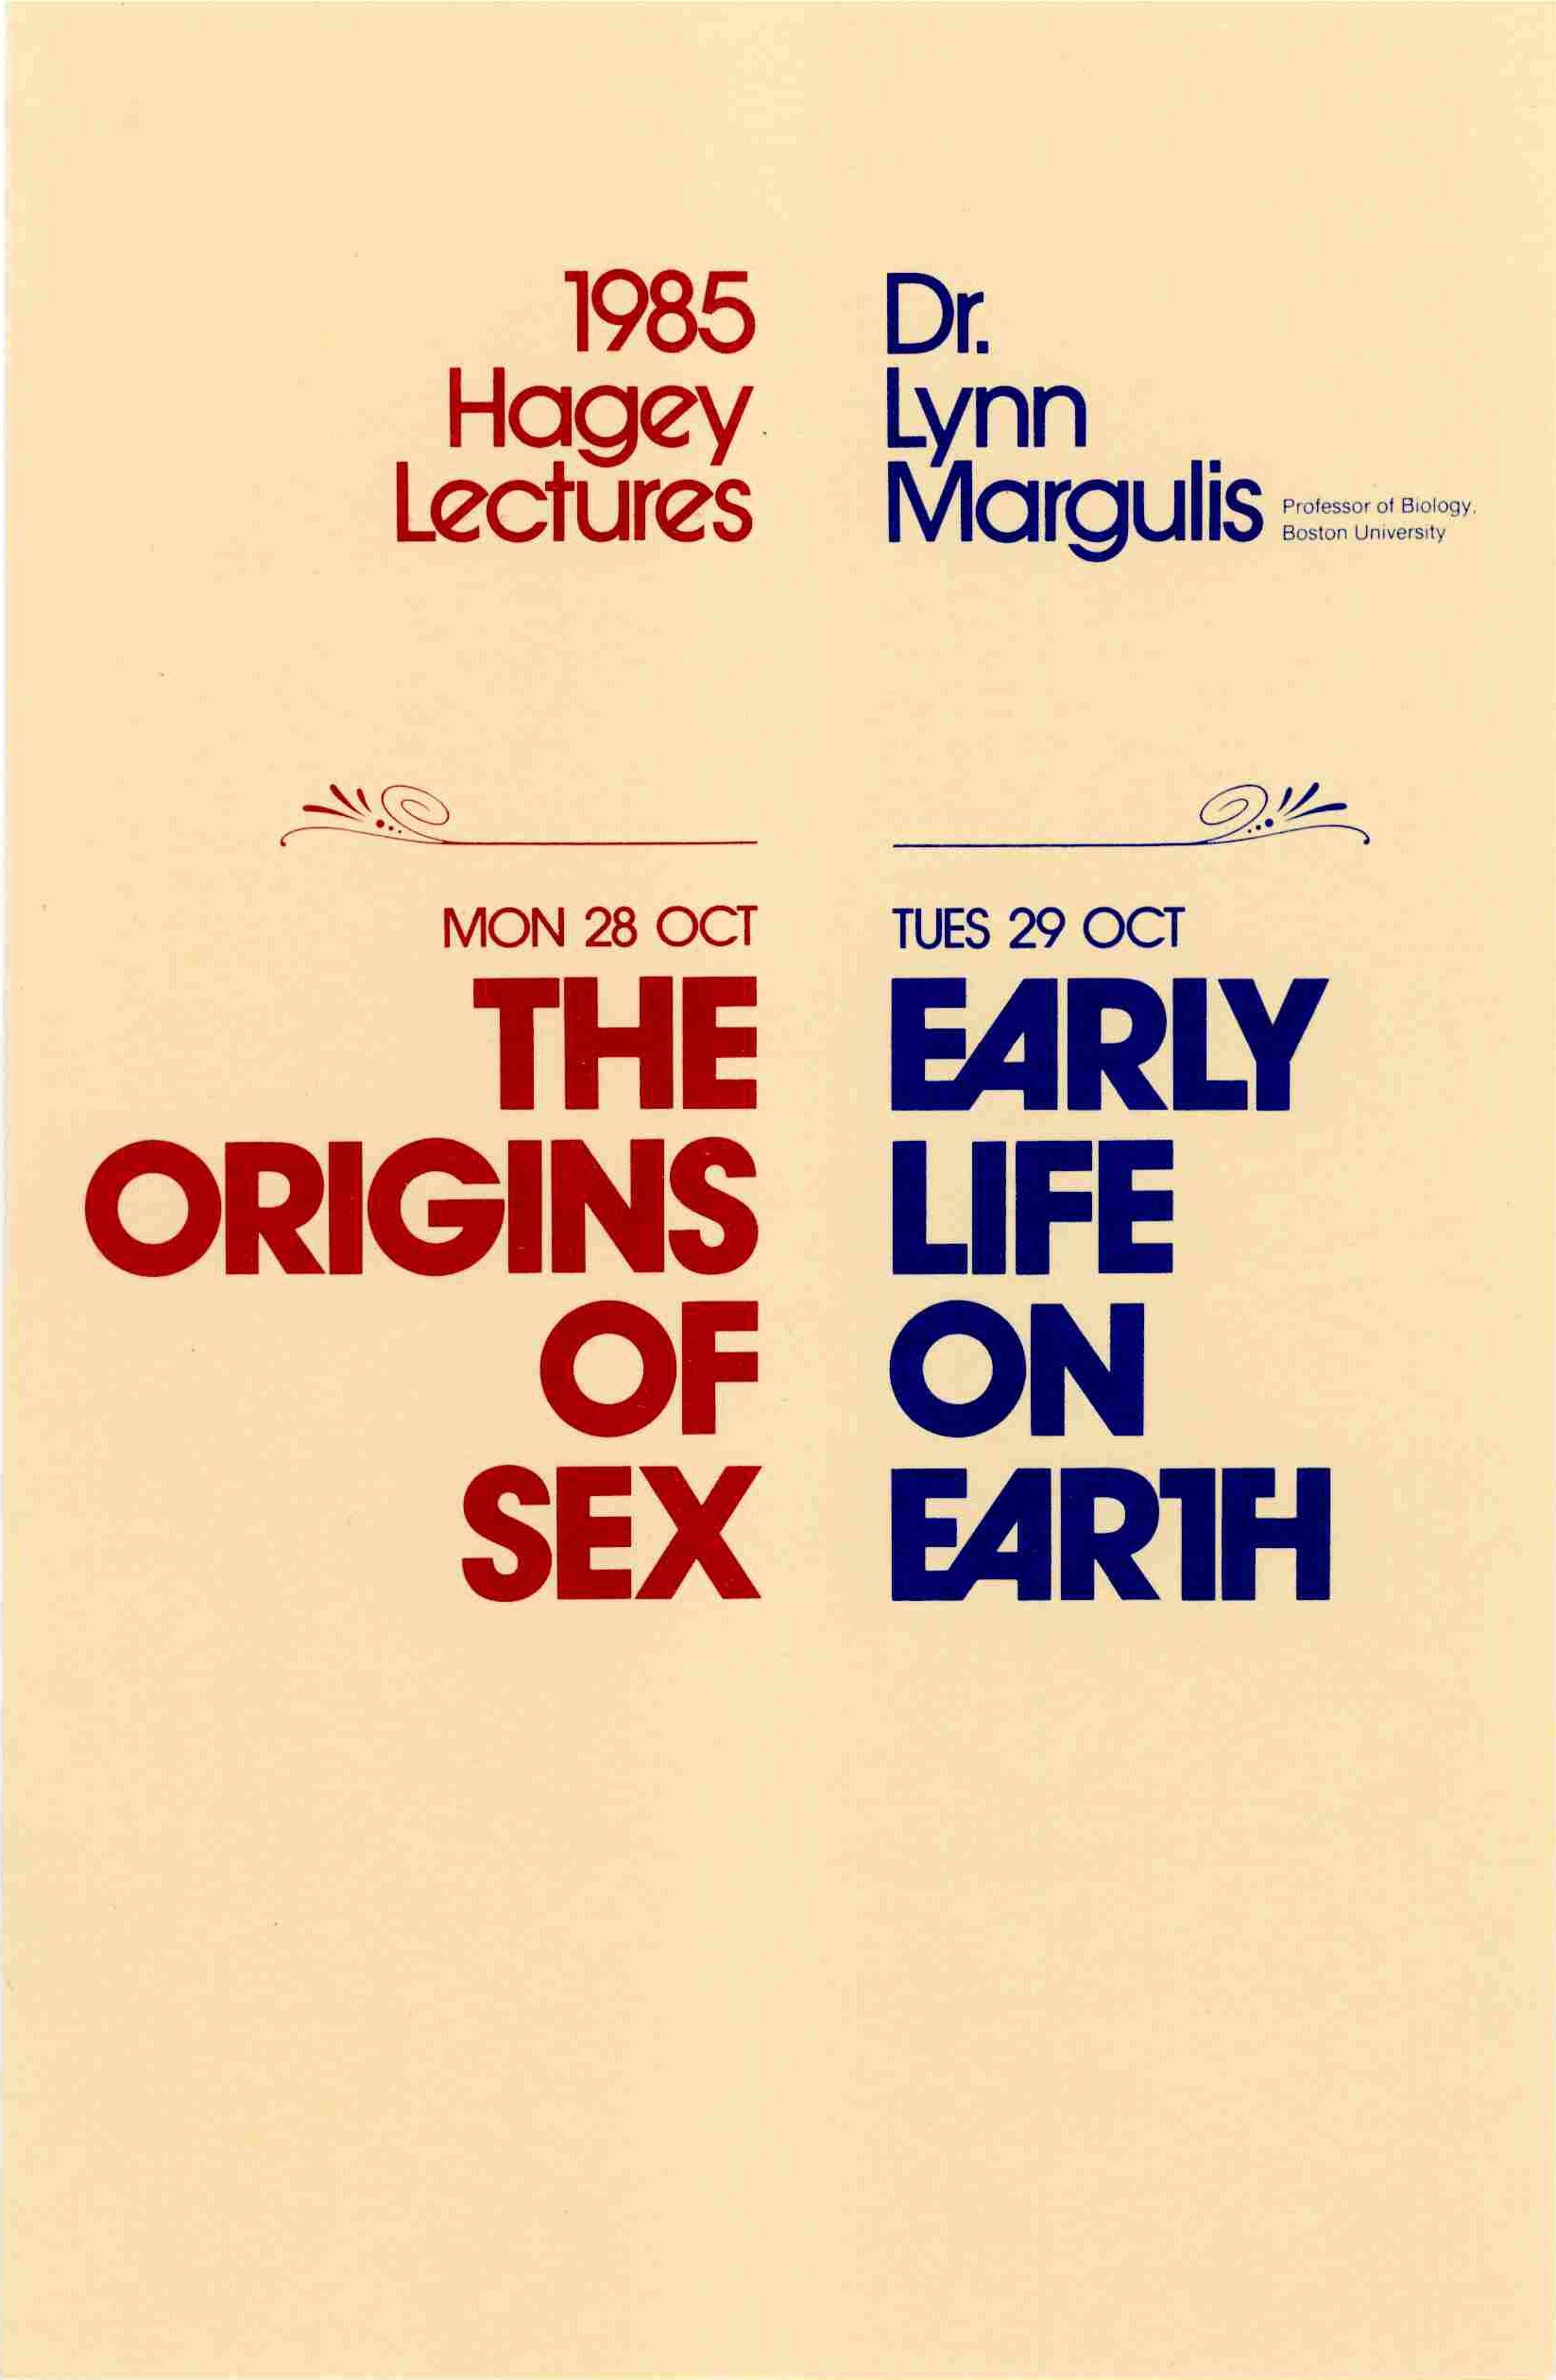 Poster for 1985 Hagey Lecture